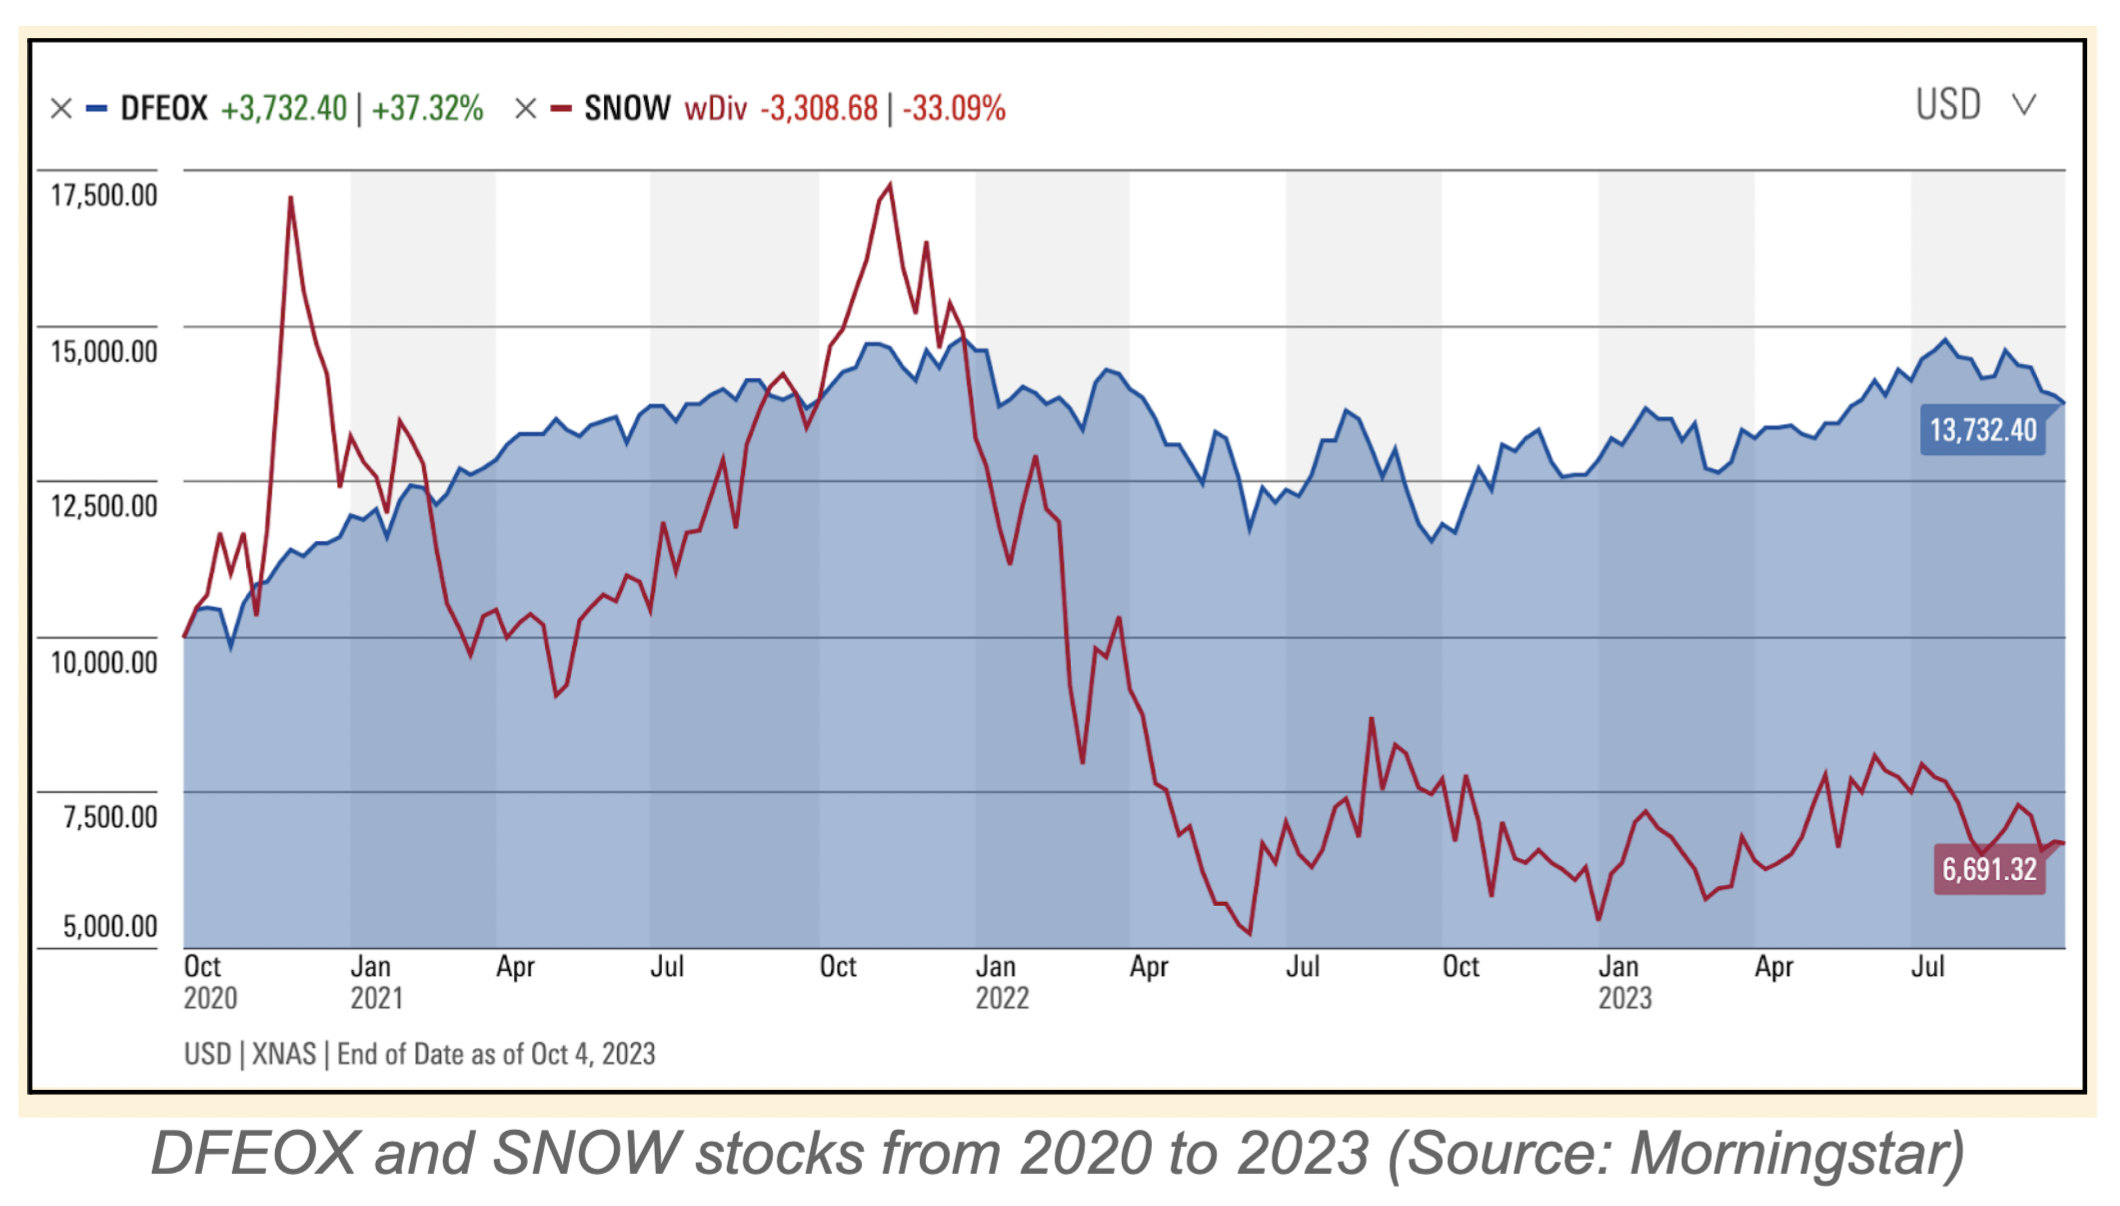 Chart comparing diversified DFEOX and concentrated SNOW stock performance from 2020 to 2023